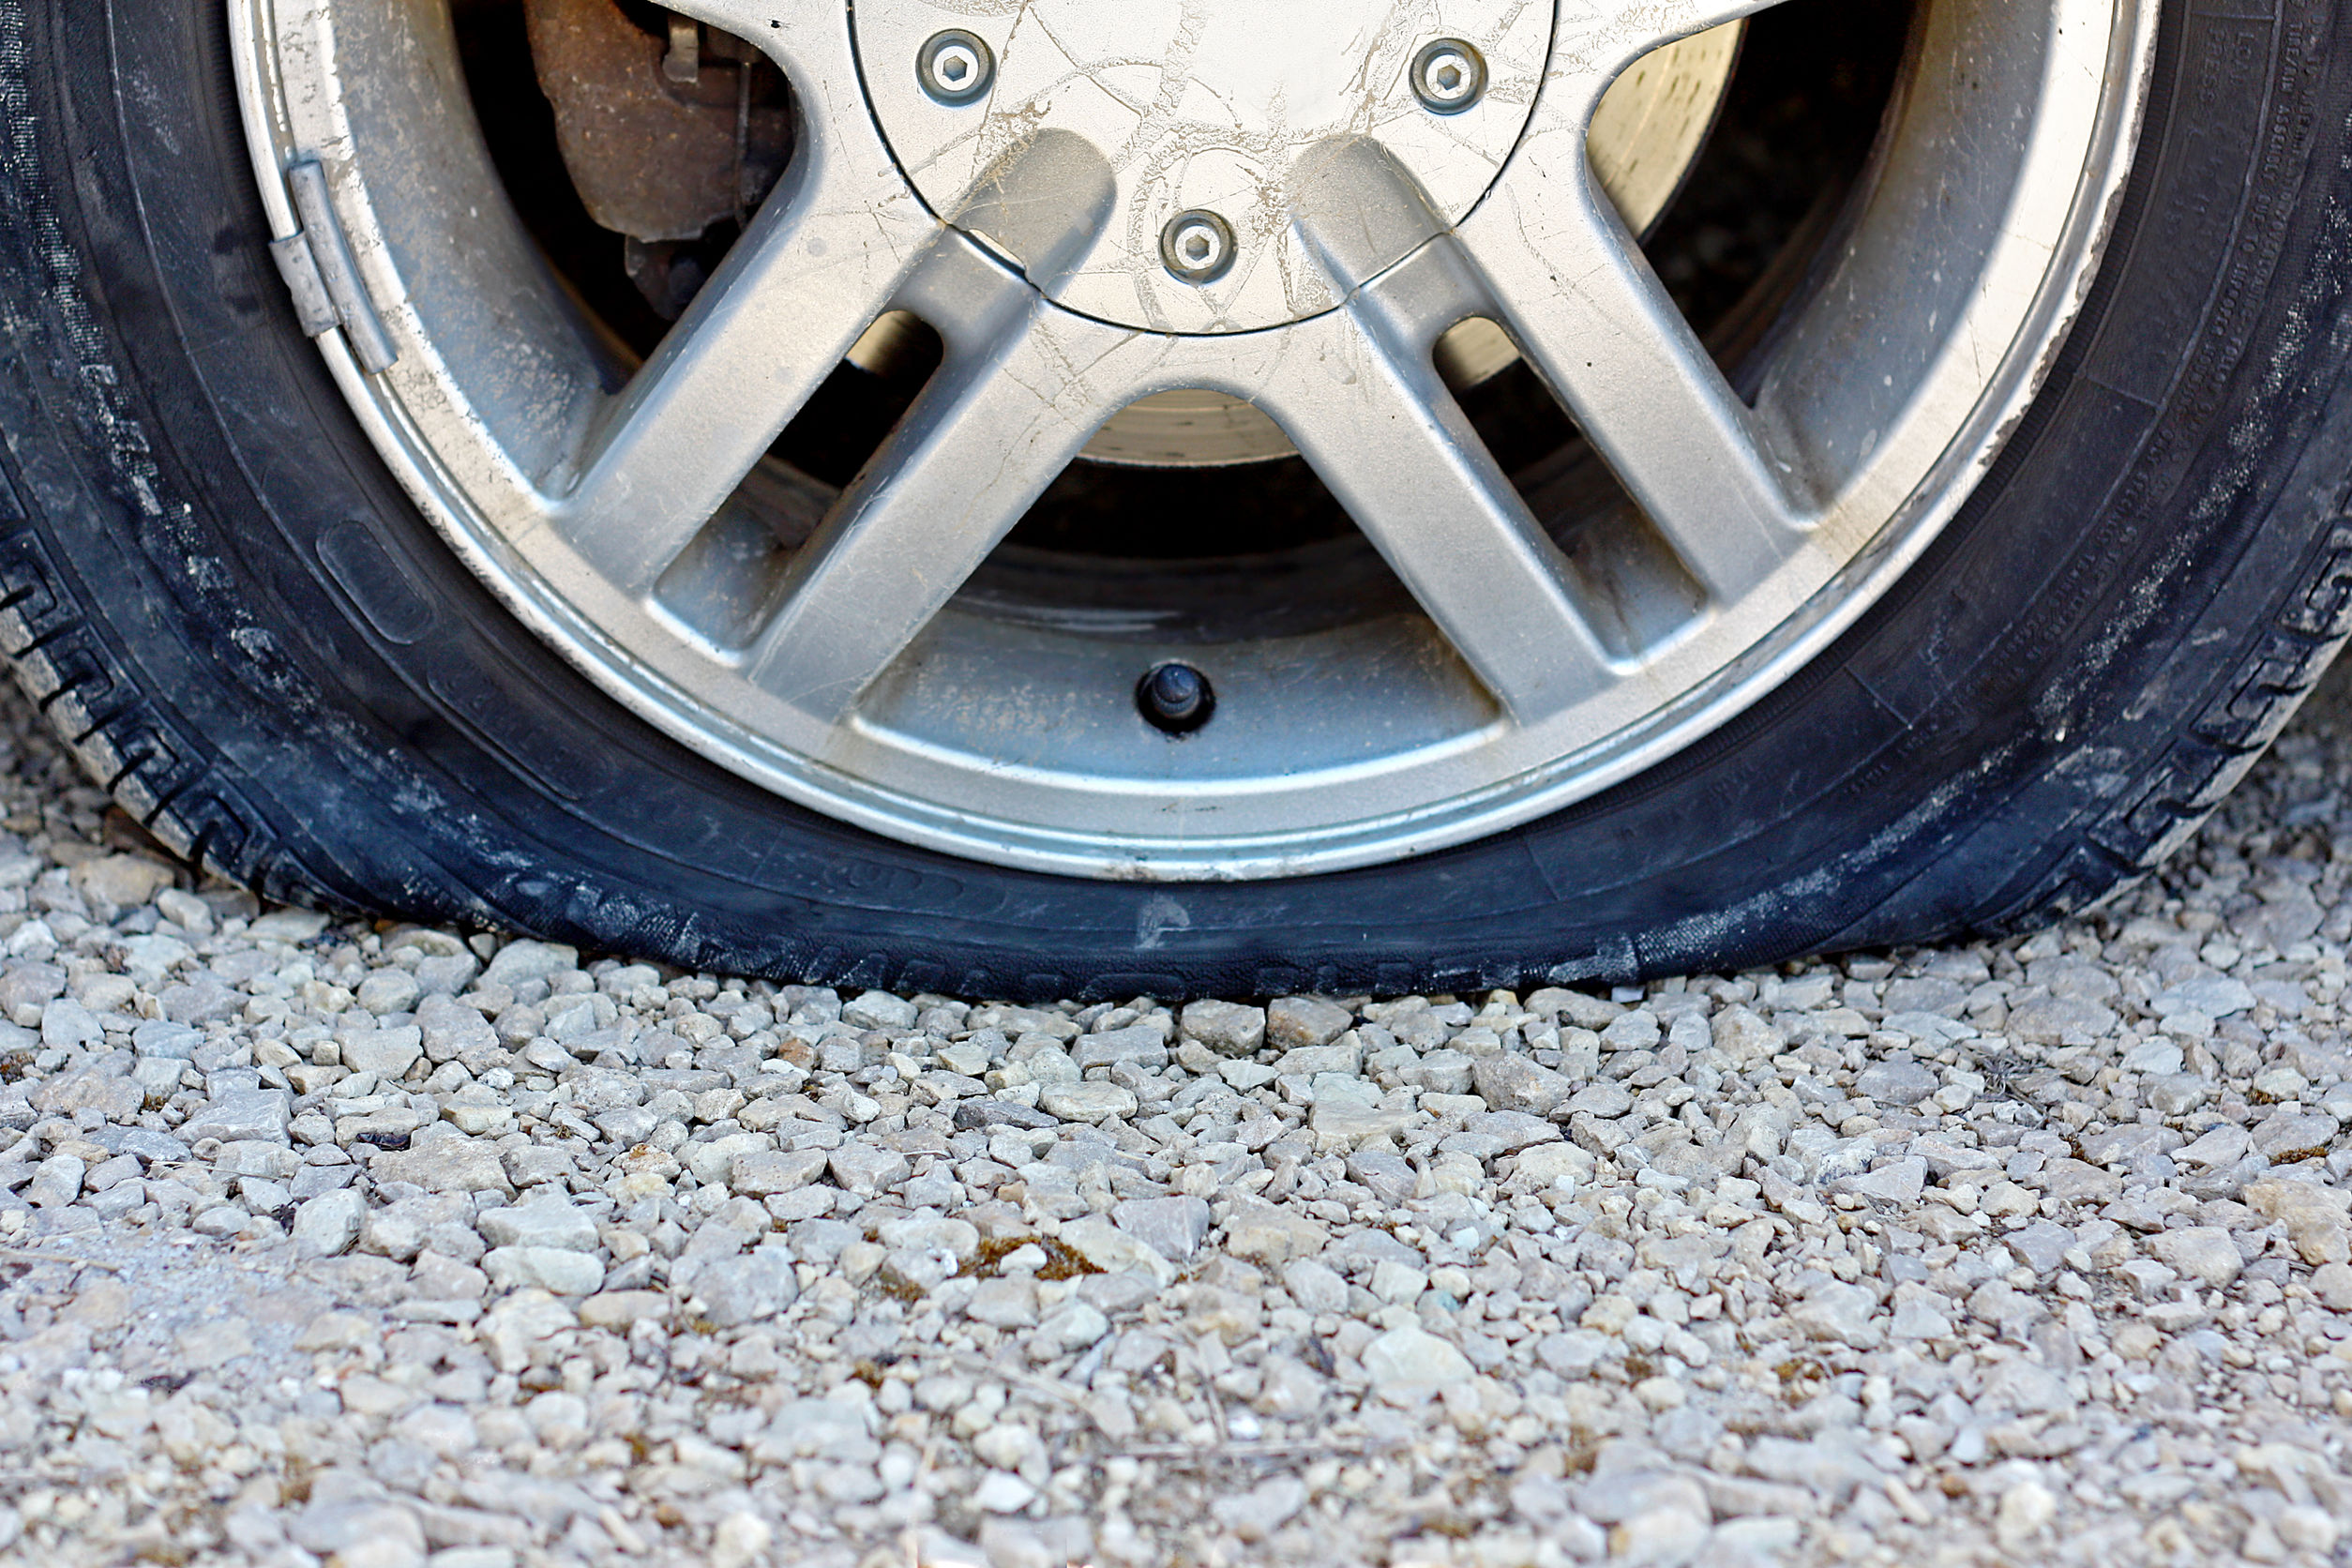 Driving after lockdown? Check your tyres! Here’s how